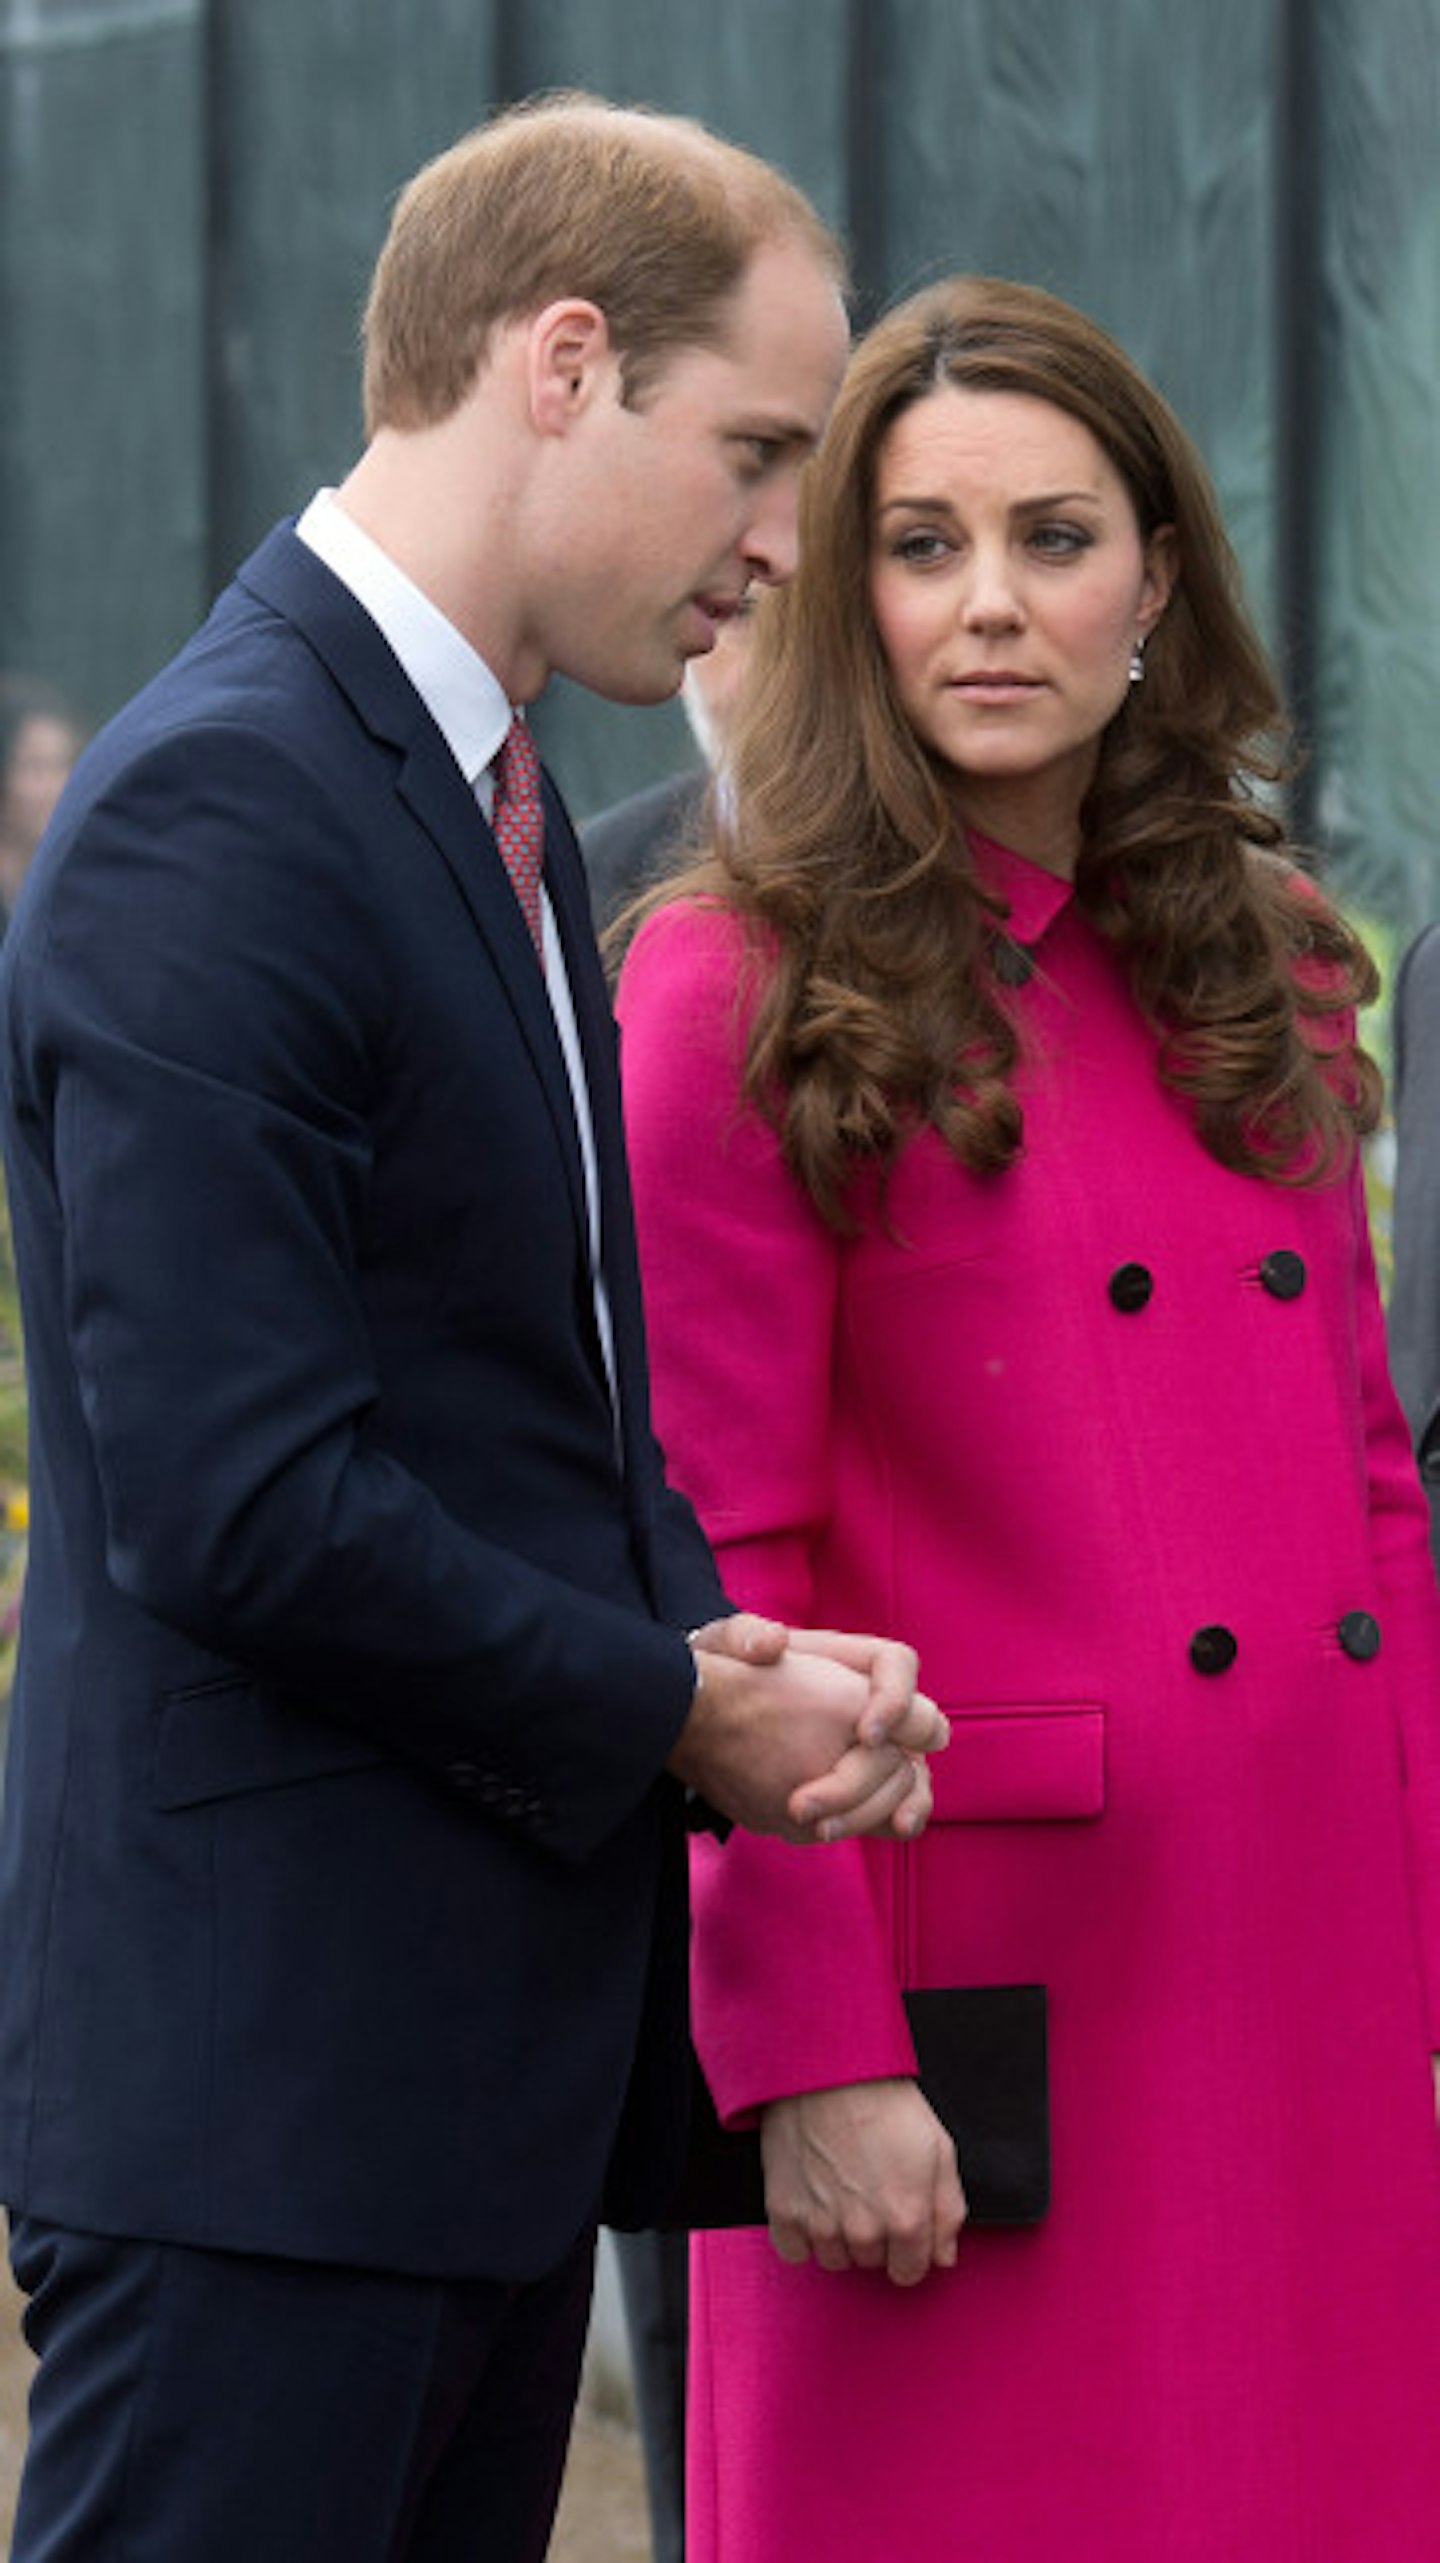 Doctors suspect Kate may be feeling 'uncomfortable' at this late stage